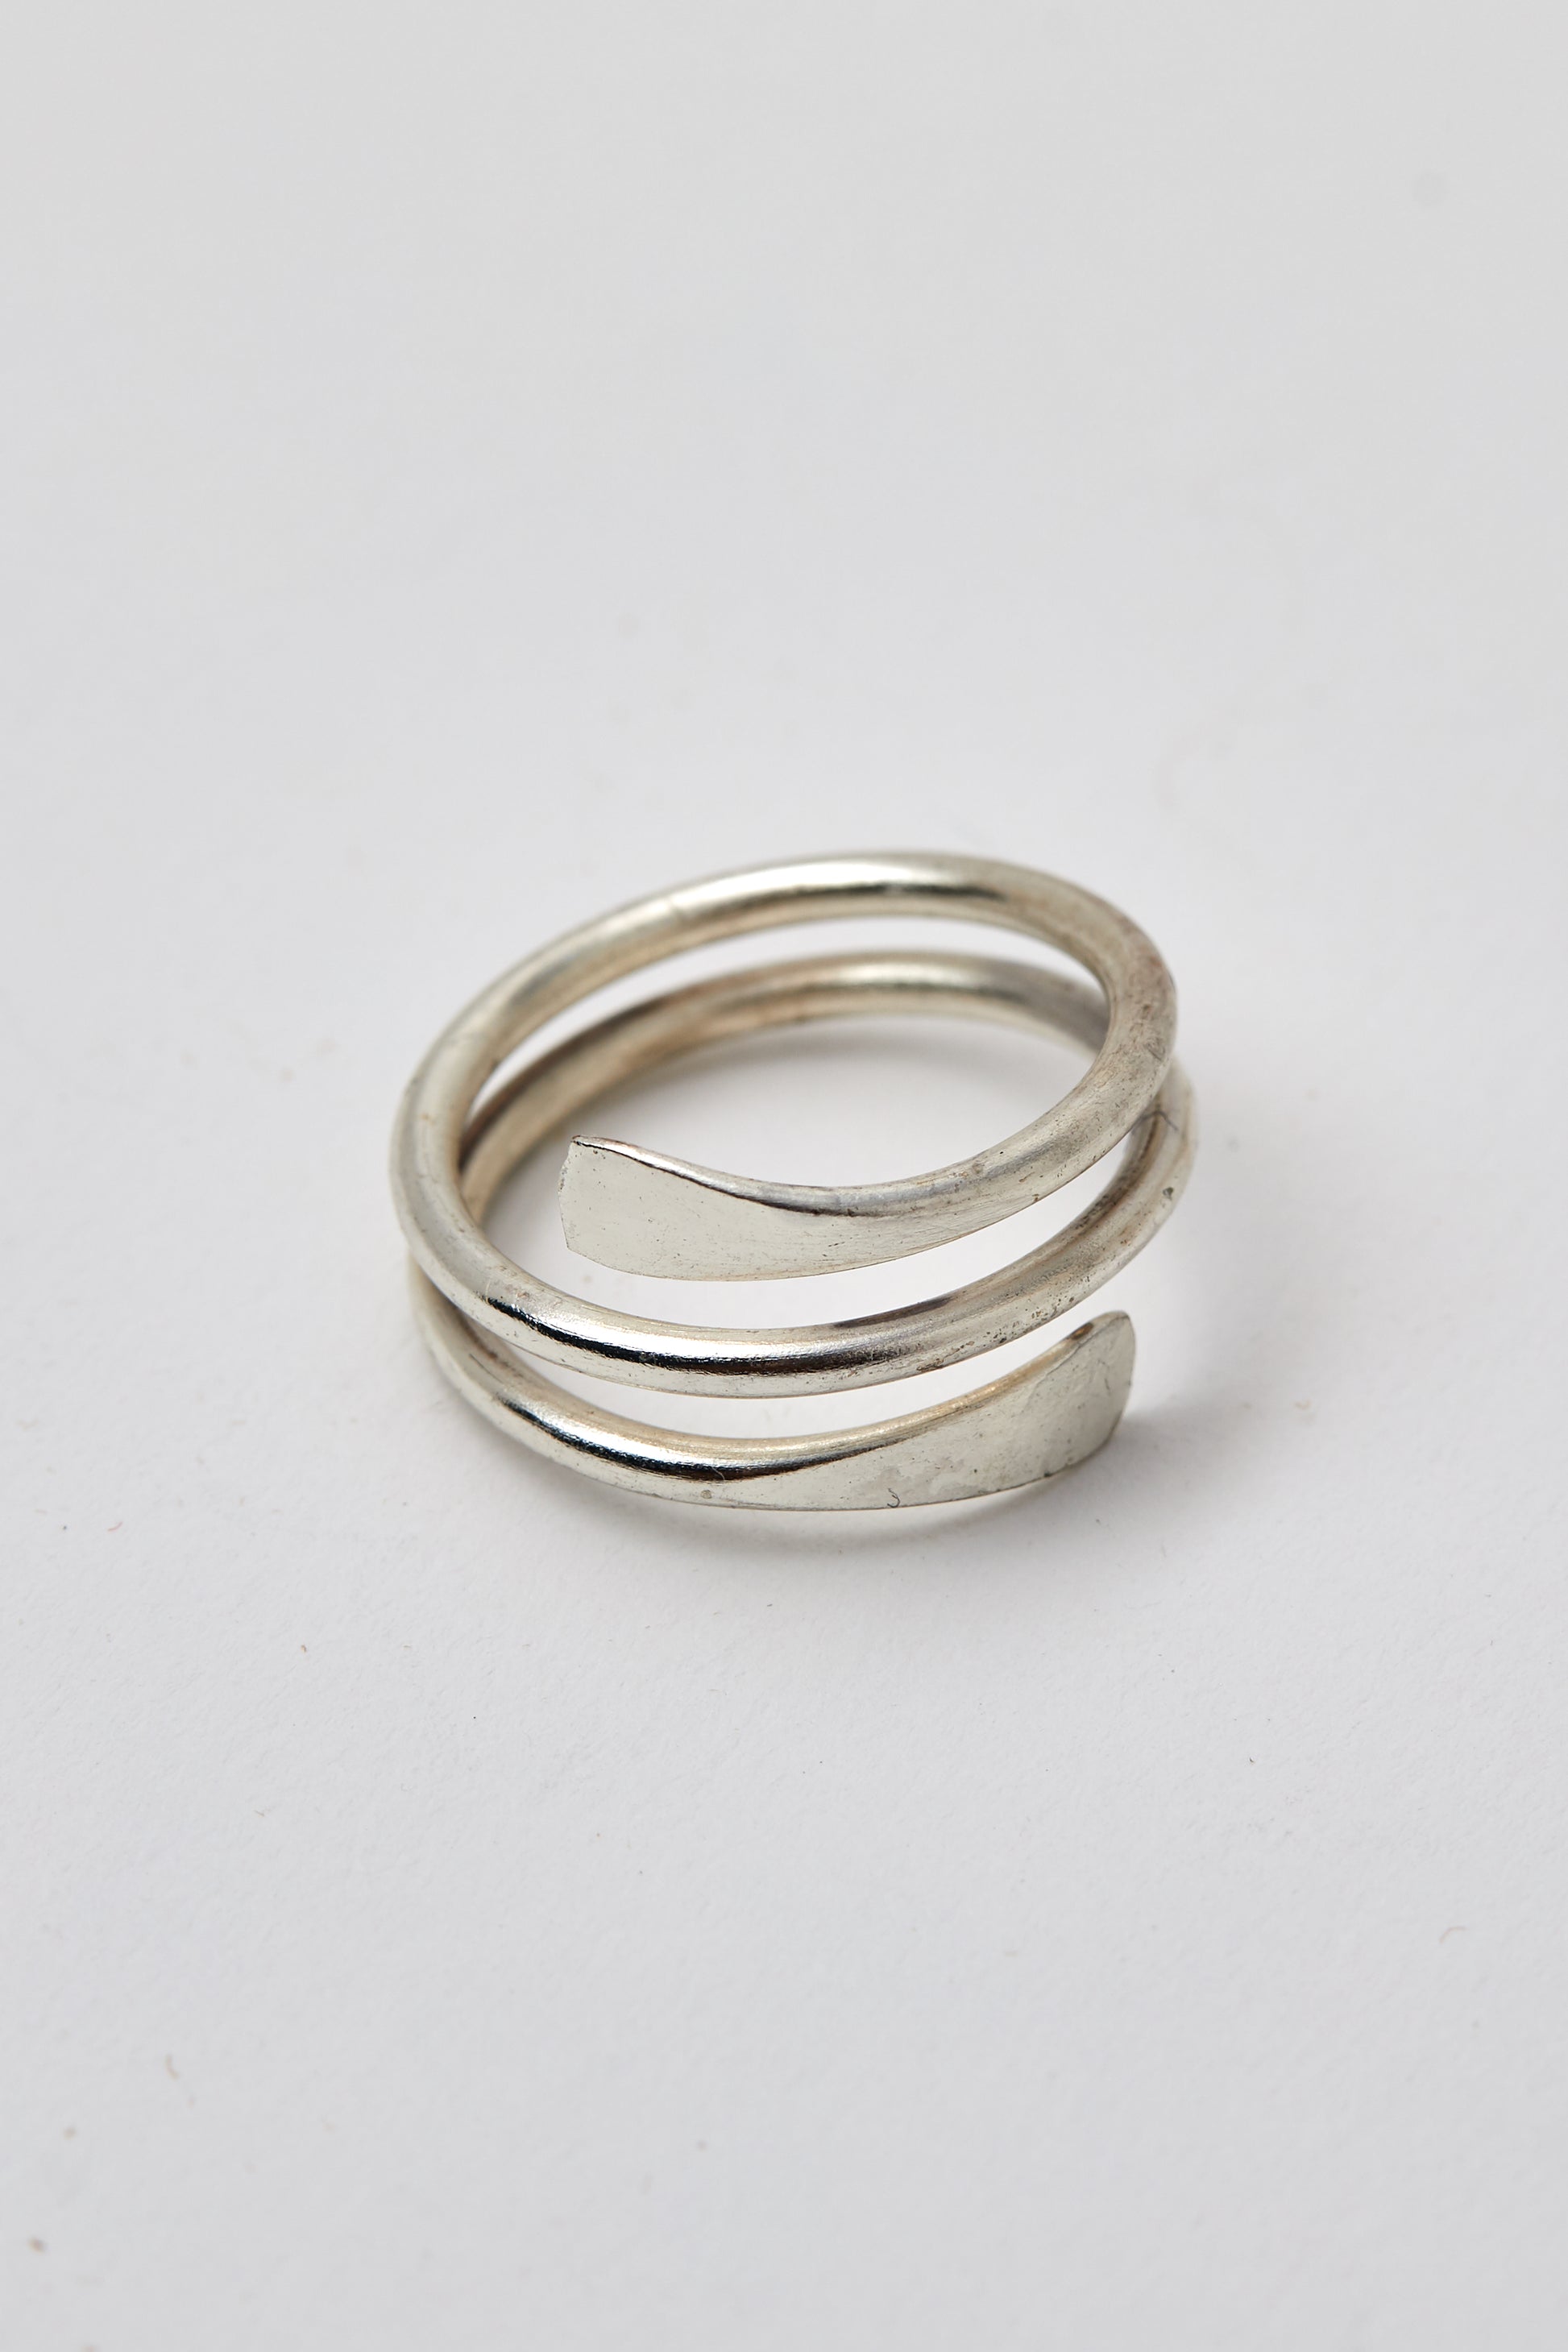 Worldfinds-Coiled-Wrap-Ring-Silver